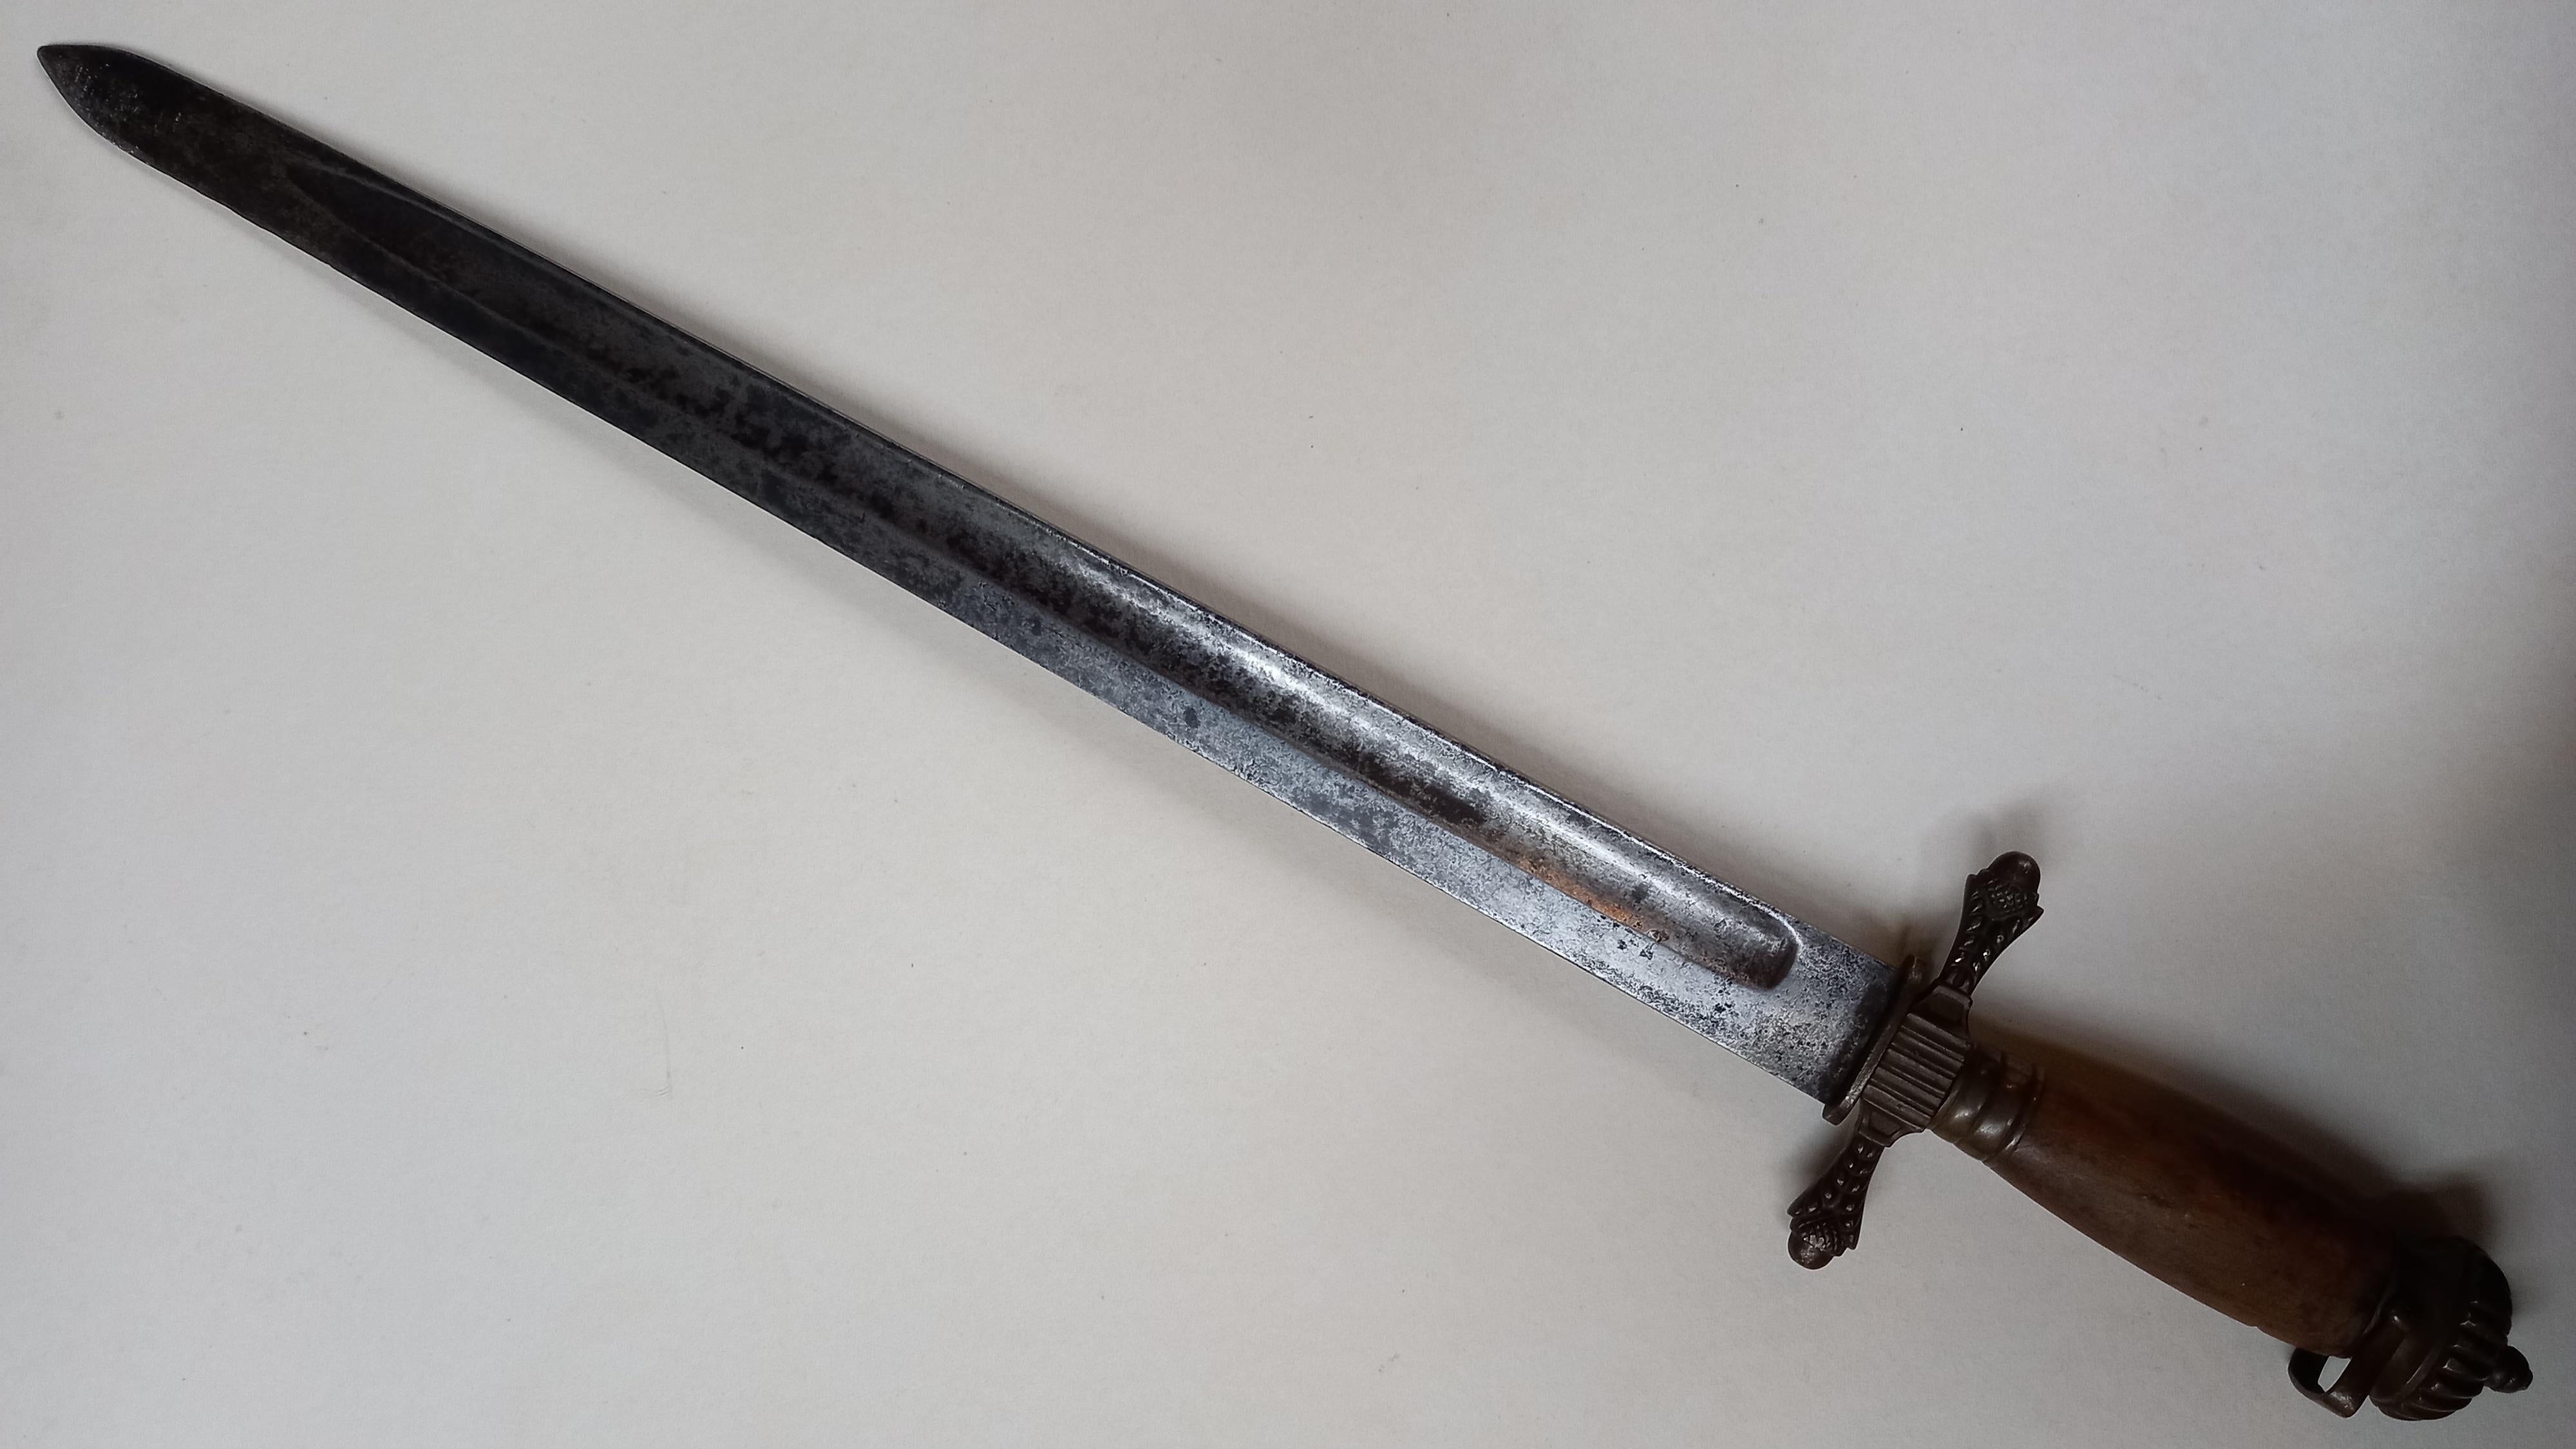 Mid 18th.century hunting sword or possibly pillow sword in very good uncleaned condition. All brass hilt fittings, missing grip wire, unmistakingly Scottish origin as suggested by the matching thistle quilllions and the large pommel cap seen